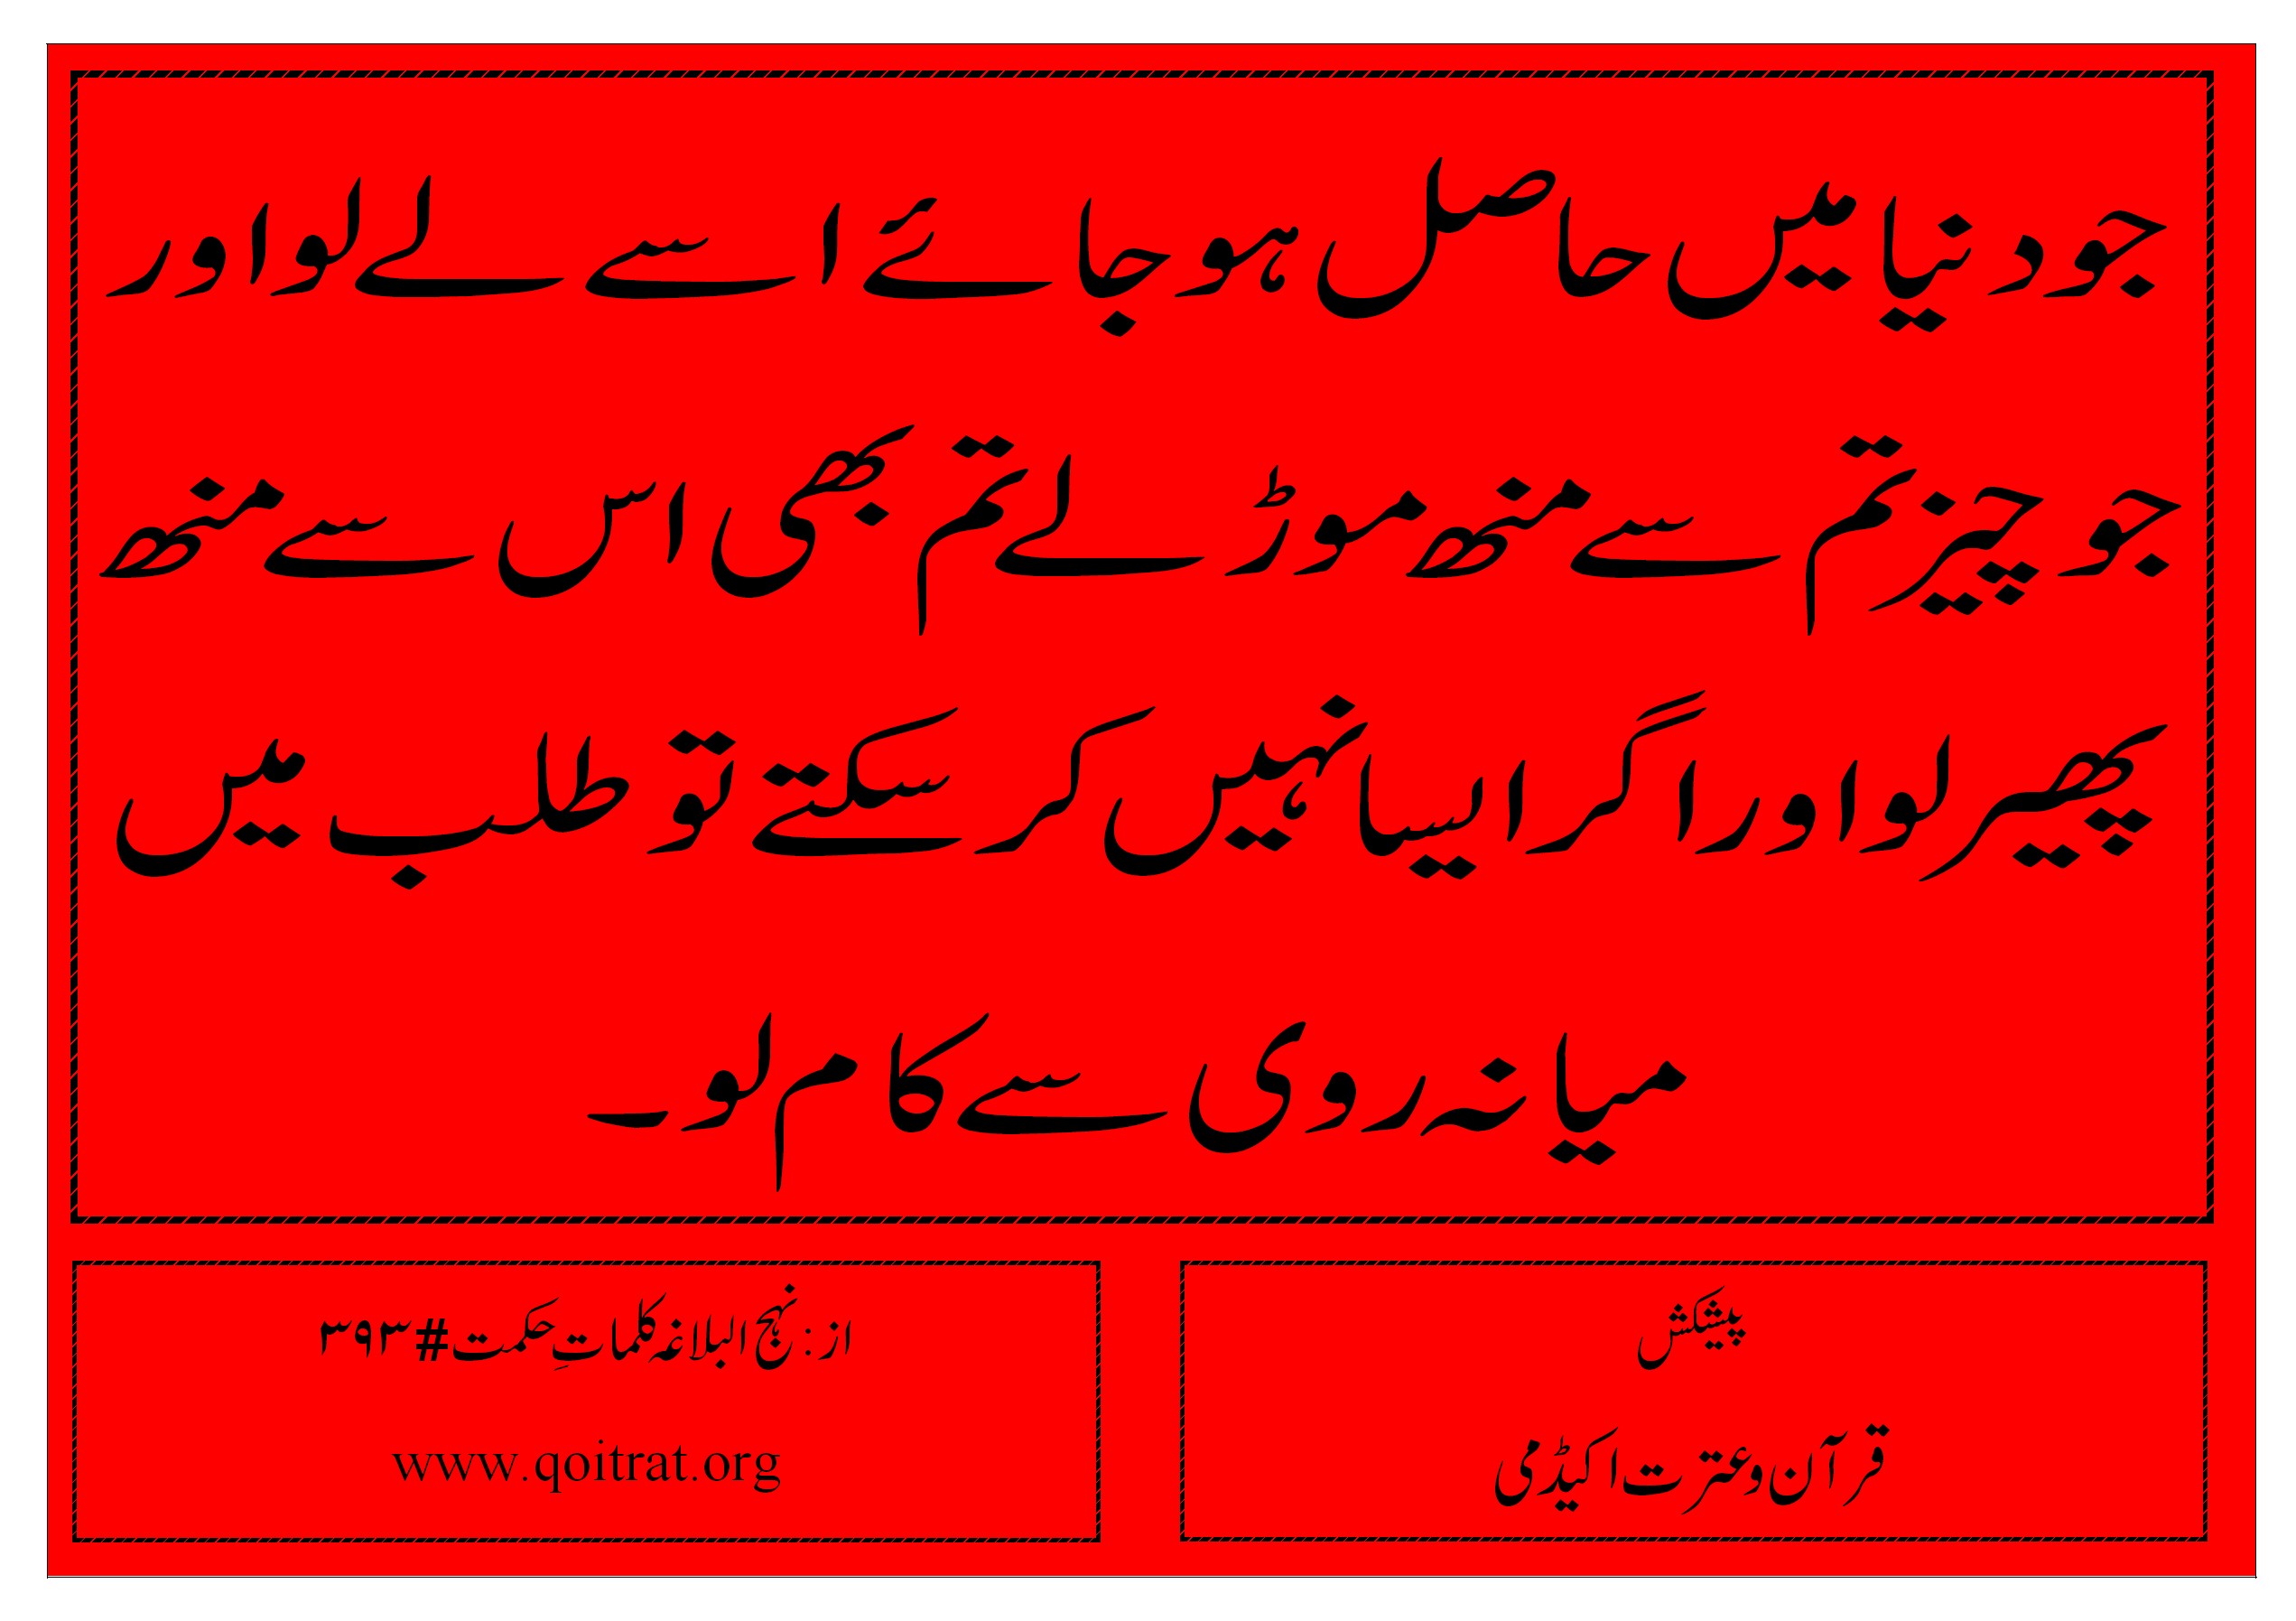 Hadees of the day